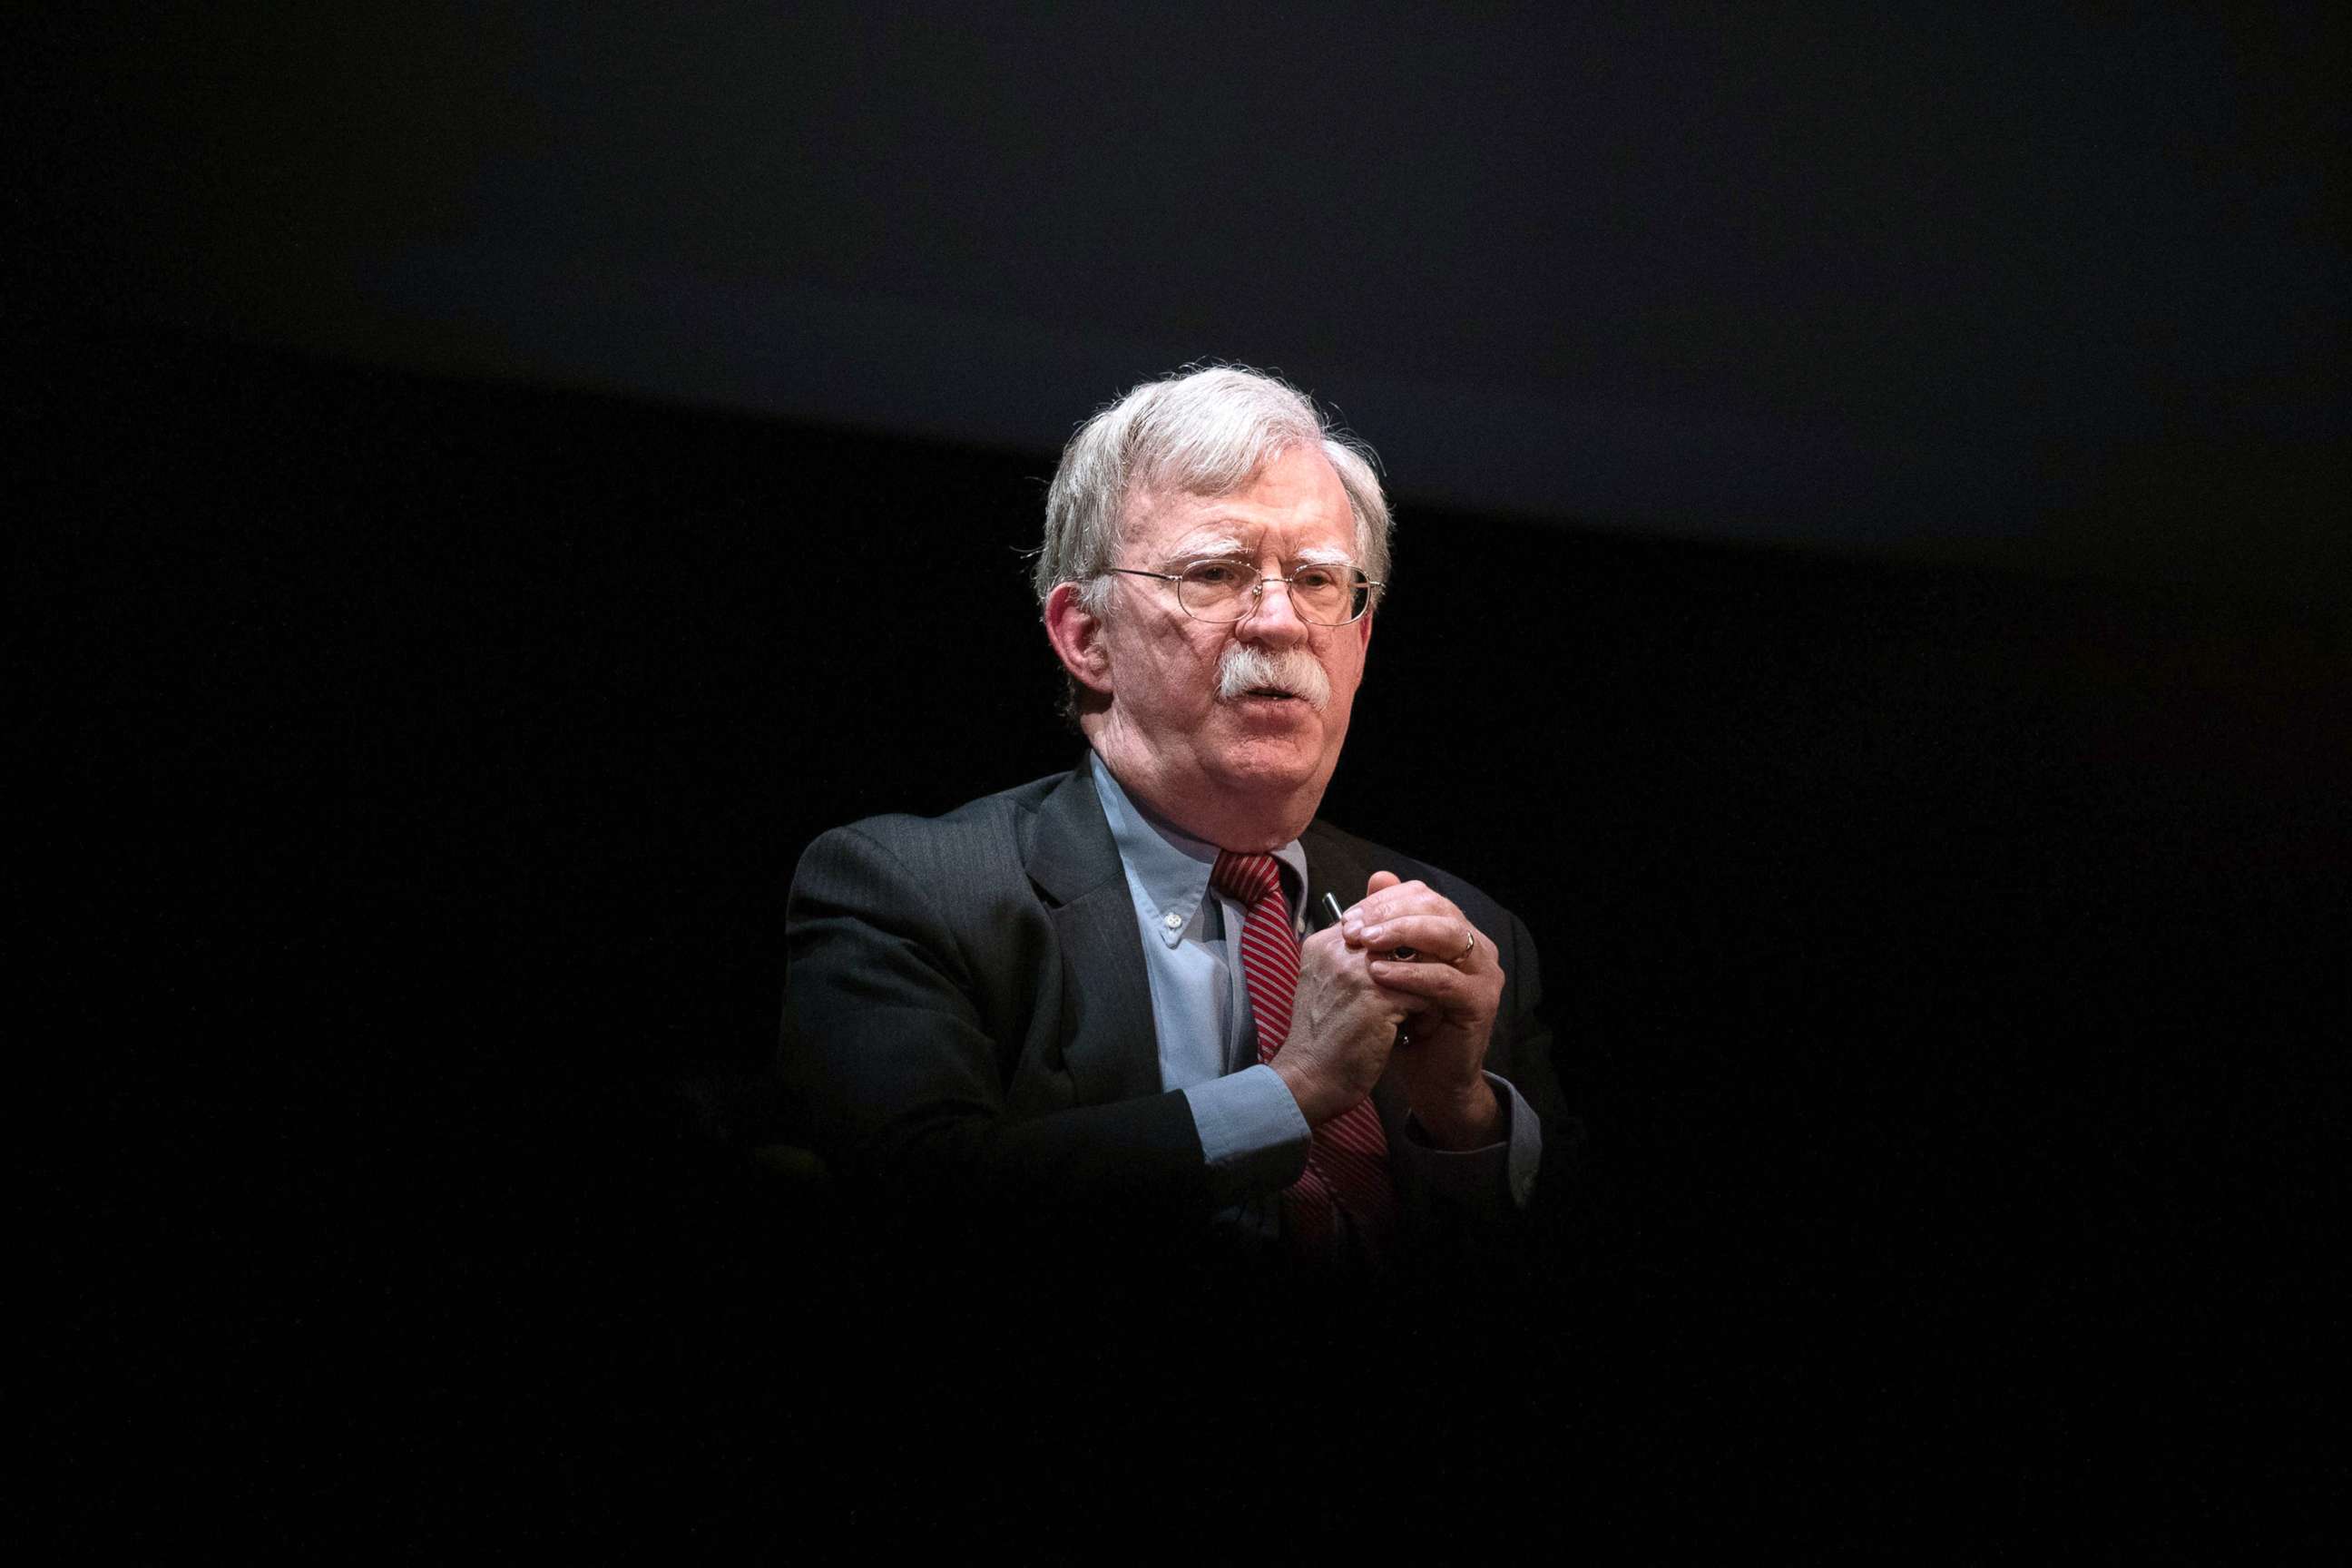 PHOTO: Former National Security adviser John Bolton speaks on stage during a public discussion at Duke University in Durham, N.C., Feb. 17, 2020.